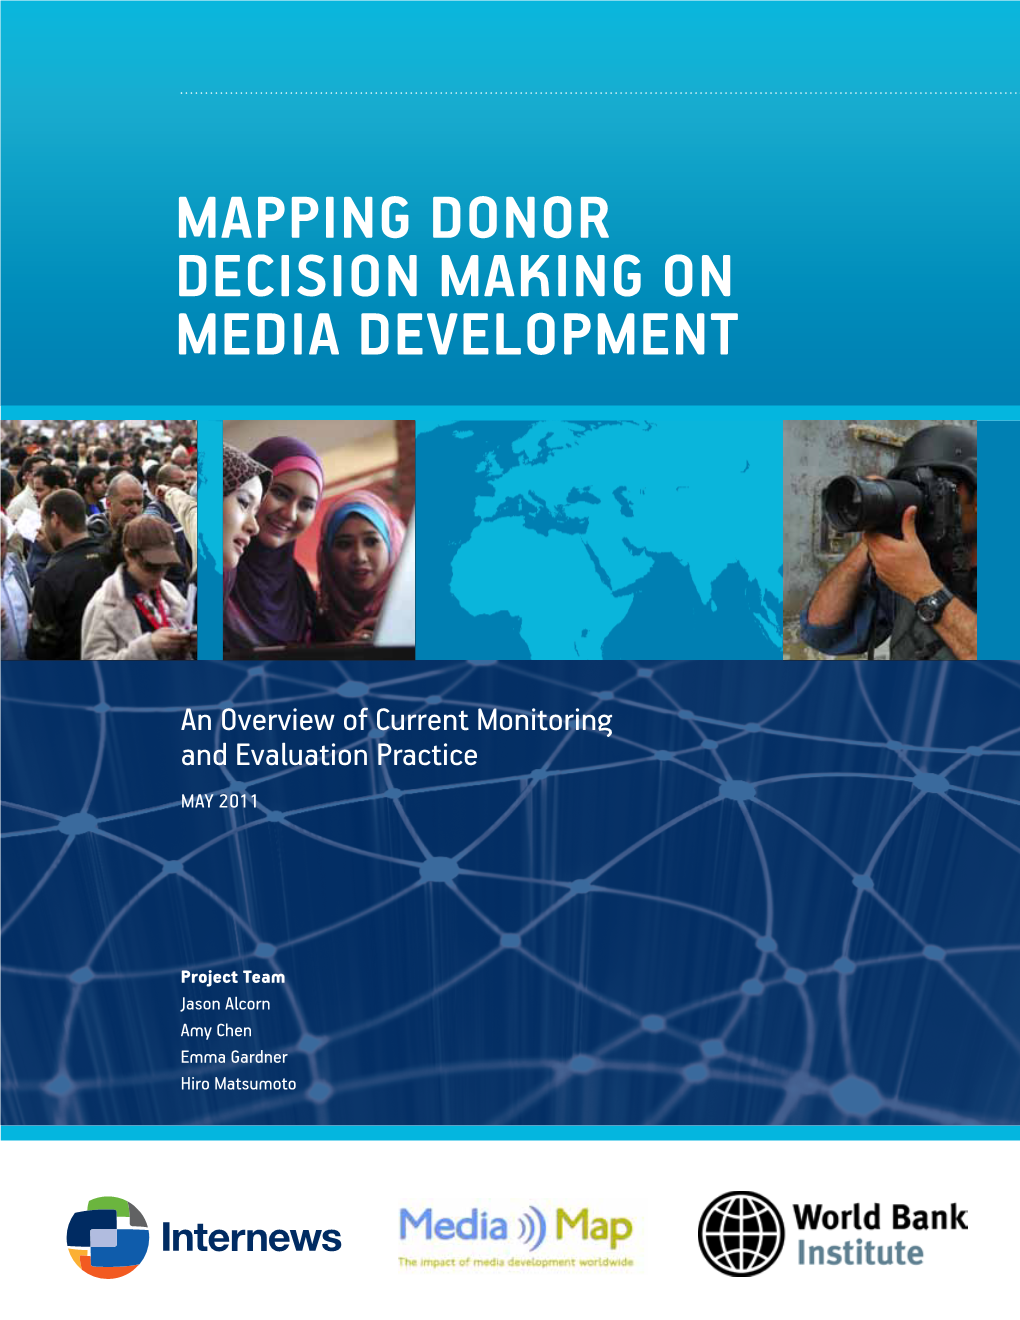 Mapping Donor Decision Making on Media Development